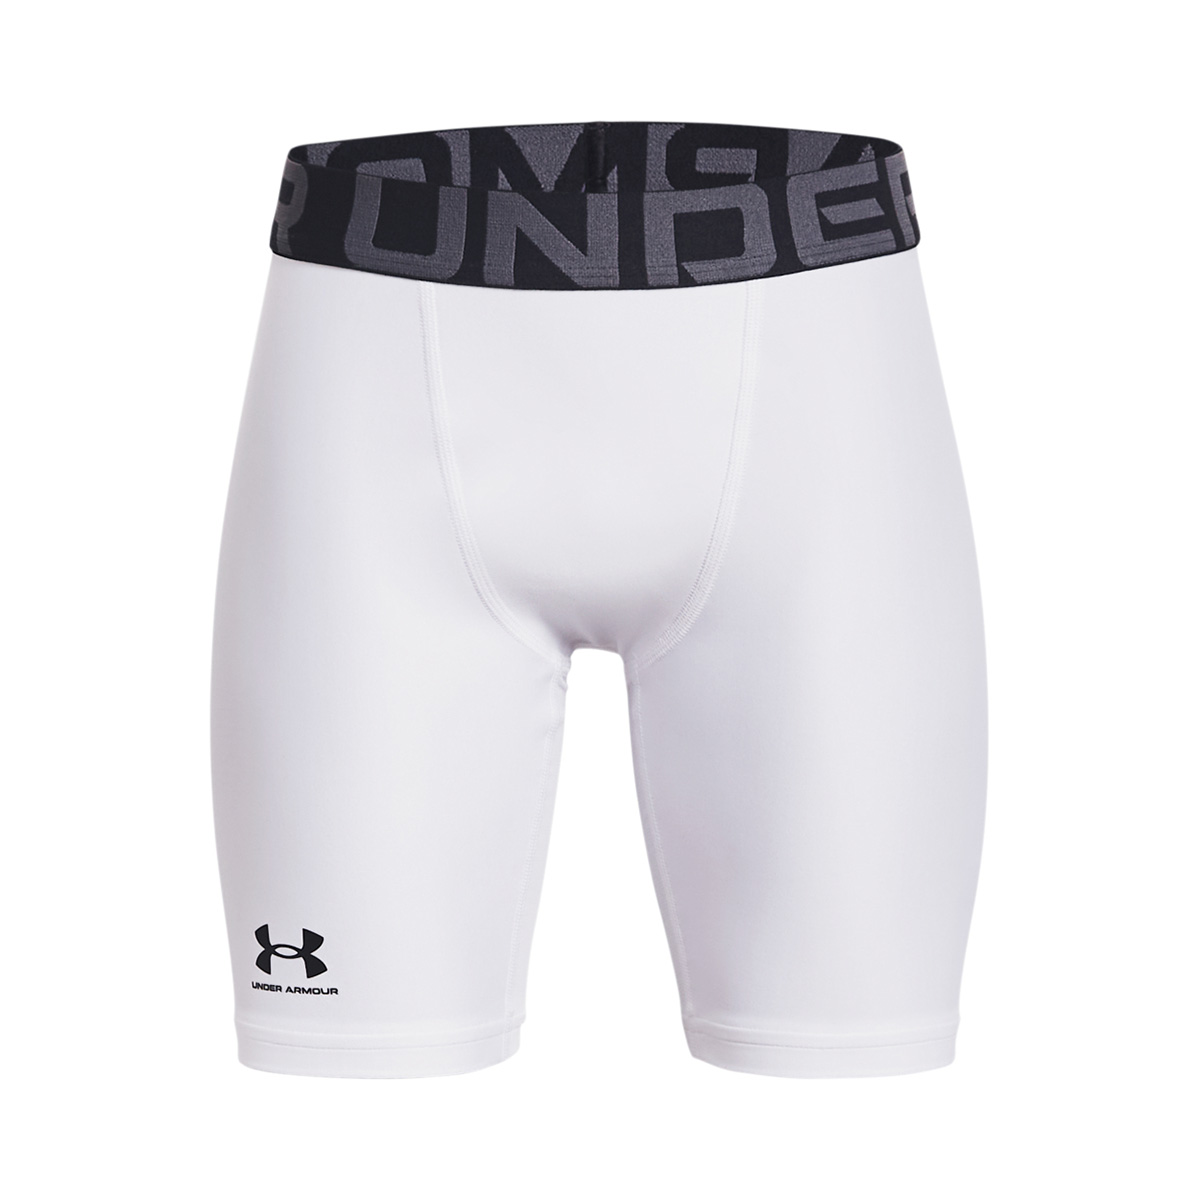 Kids Under Armour Heatgear Fitted Shorts - White | rugbystore